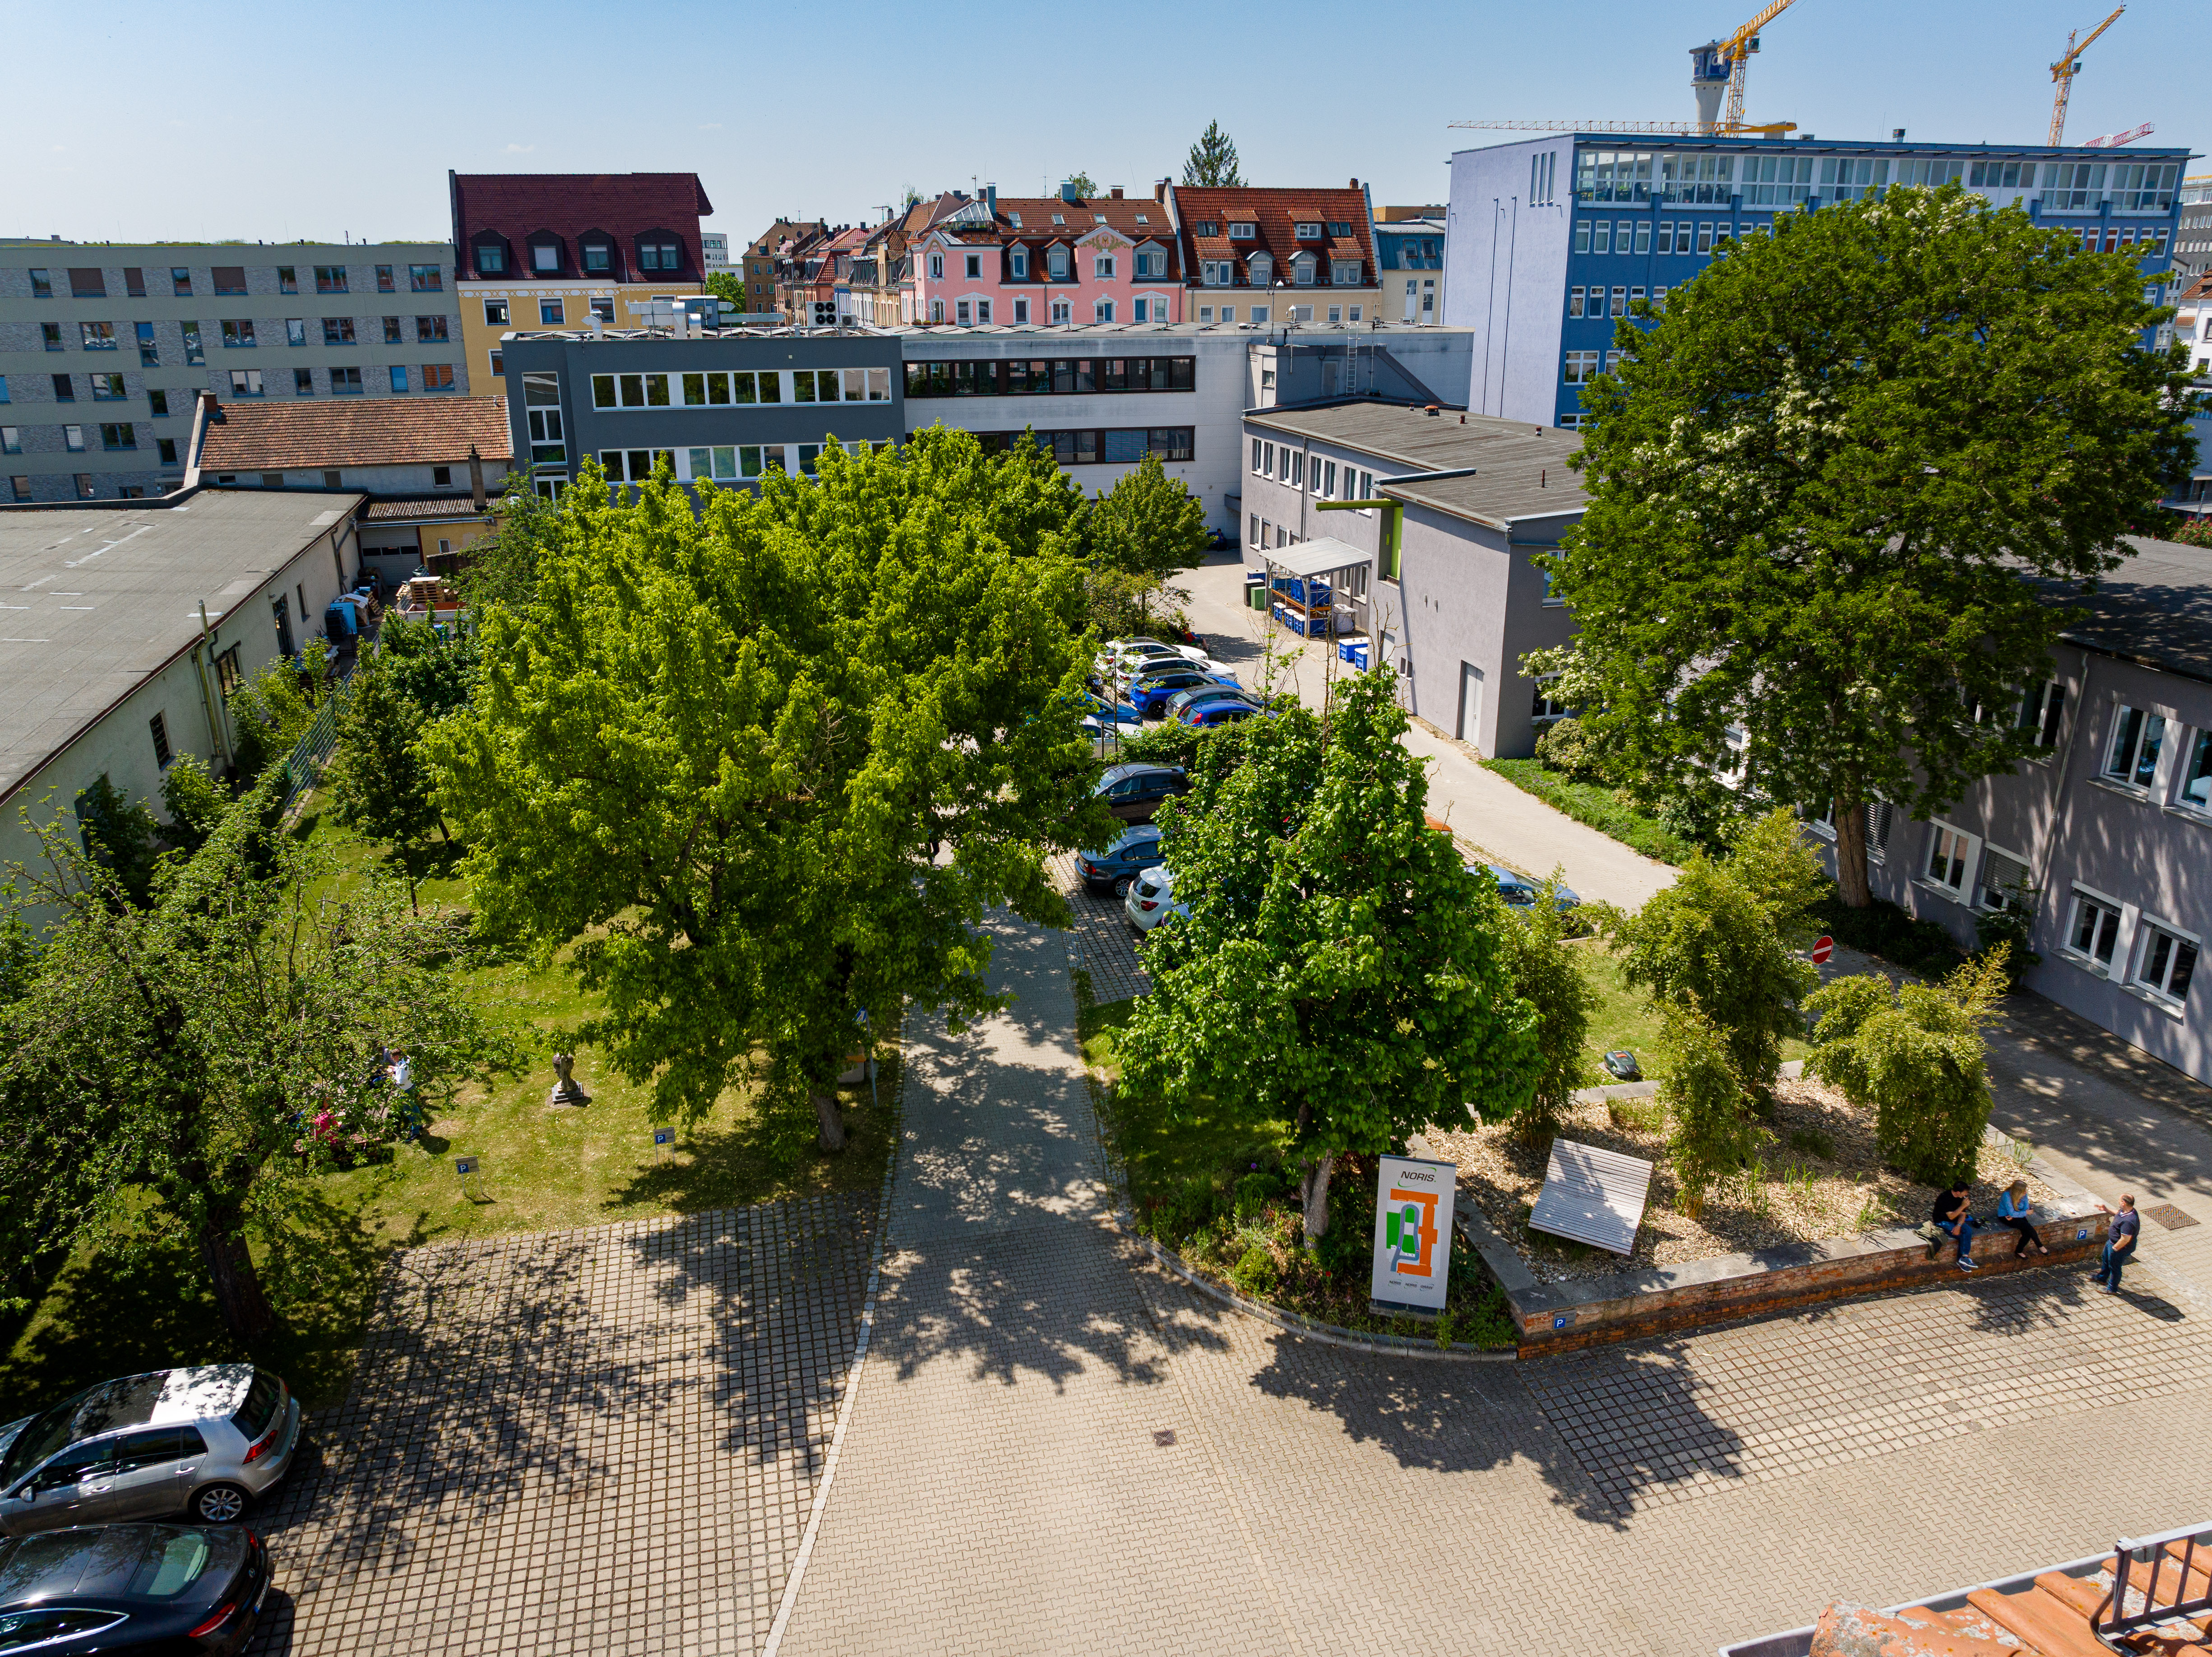 The image shows the Noris garden in the inner courtyard of Noris Group GmbH